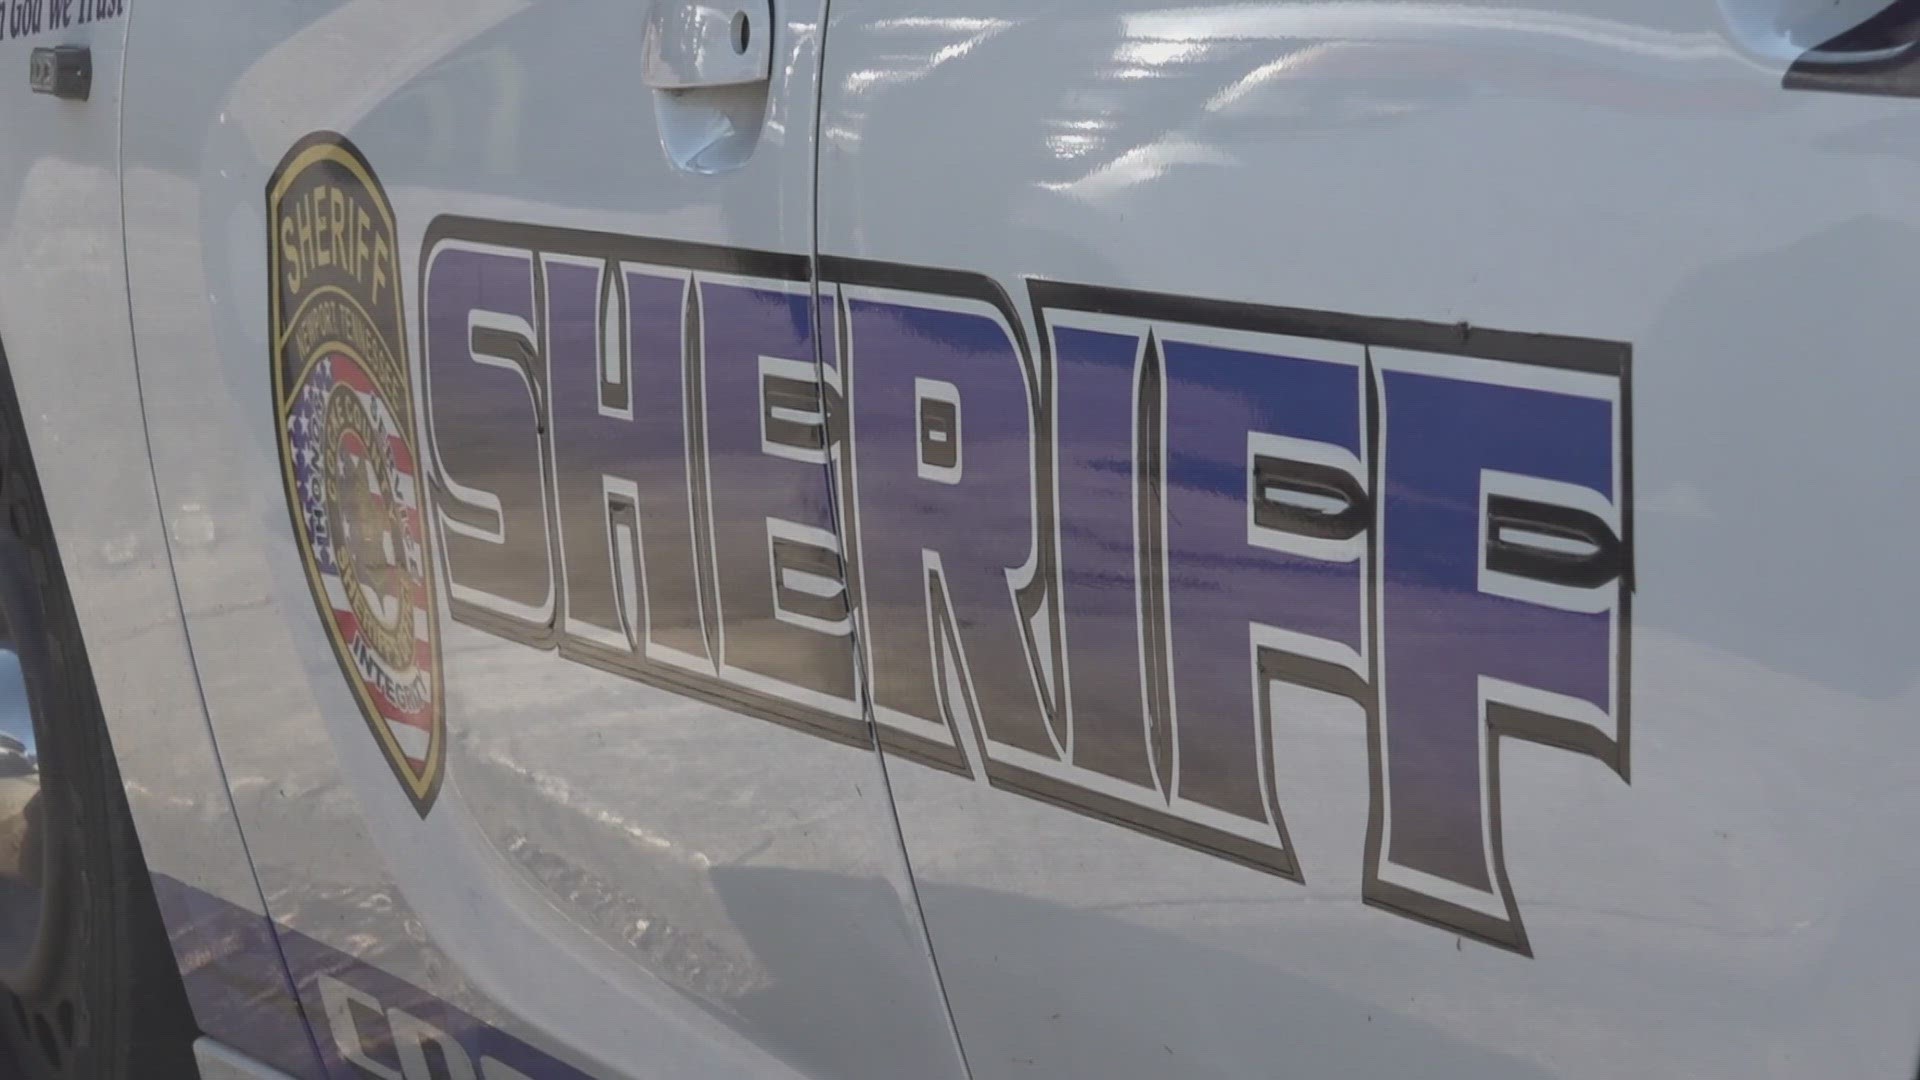 The Cocke County Sheriff said so far into 2023, 57 overdoses were reported with 21 fatalities. In 2022, the county saw 52 overdoses with six fatalities.